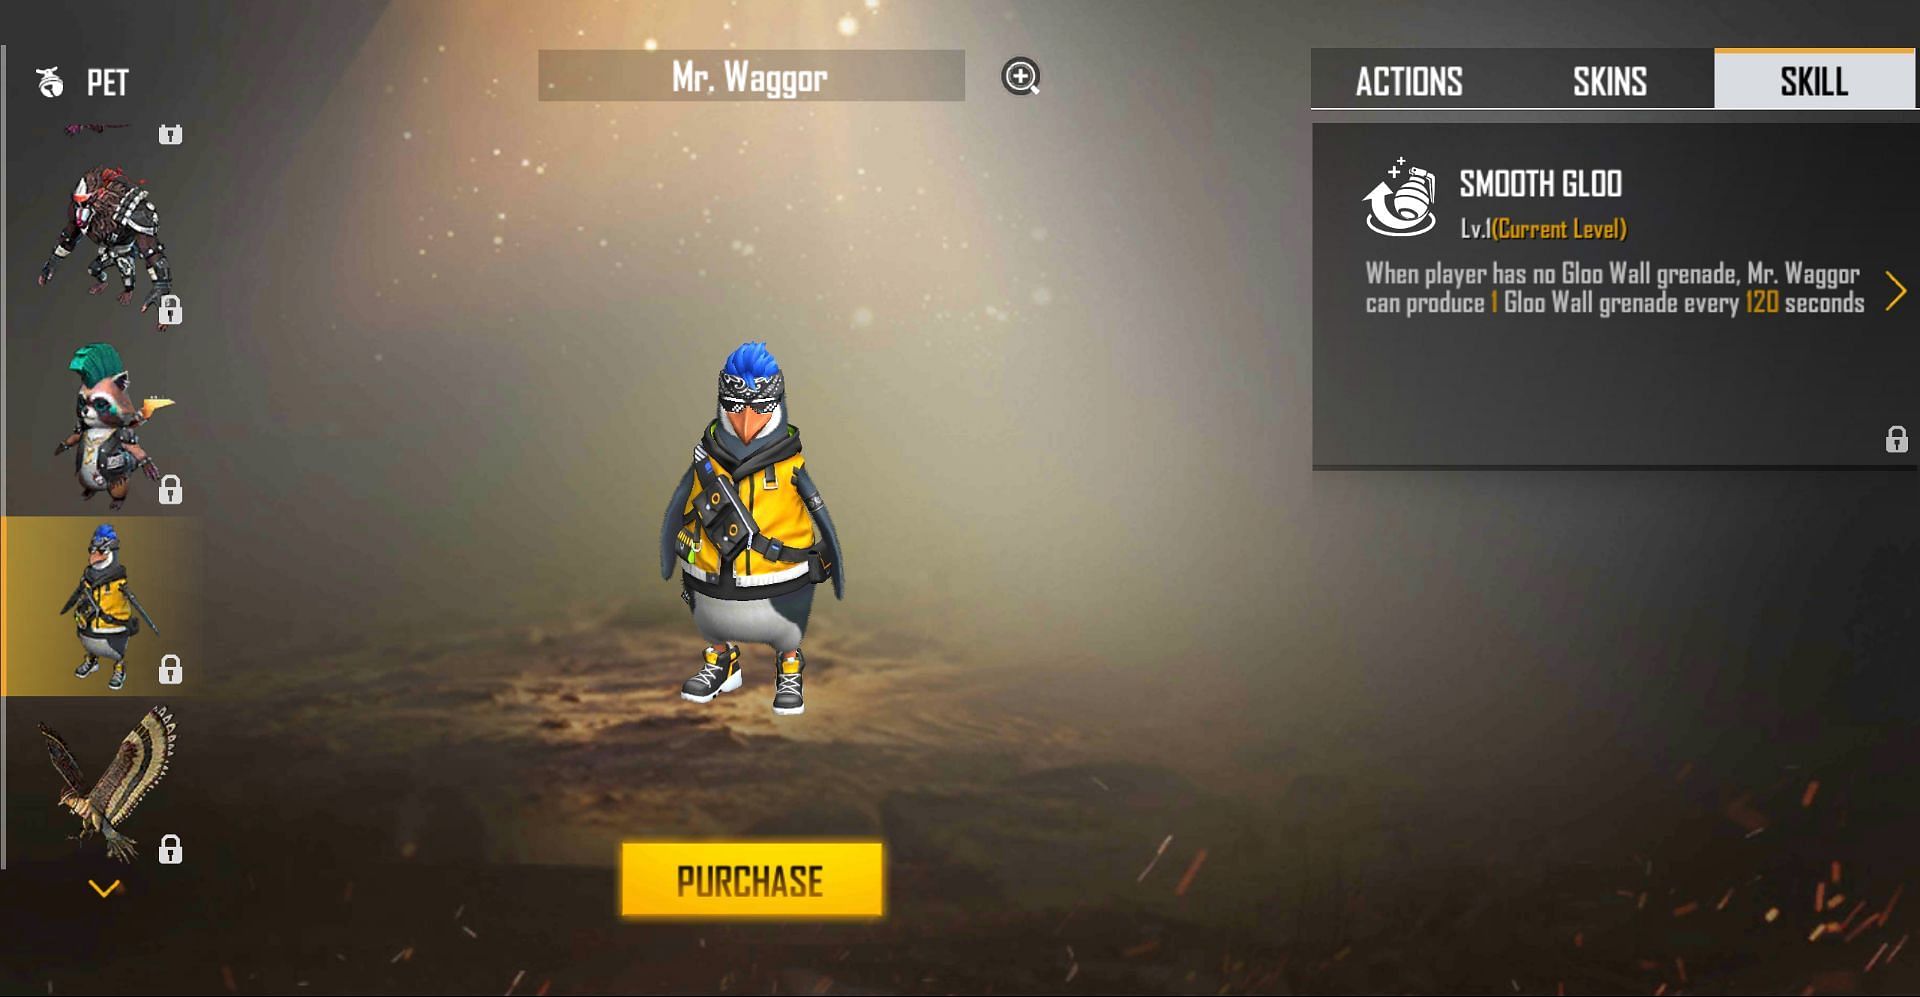 Mr. Waggor is the most used pet in Free Fire (Image via Free Fire)